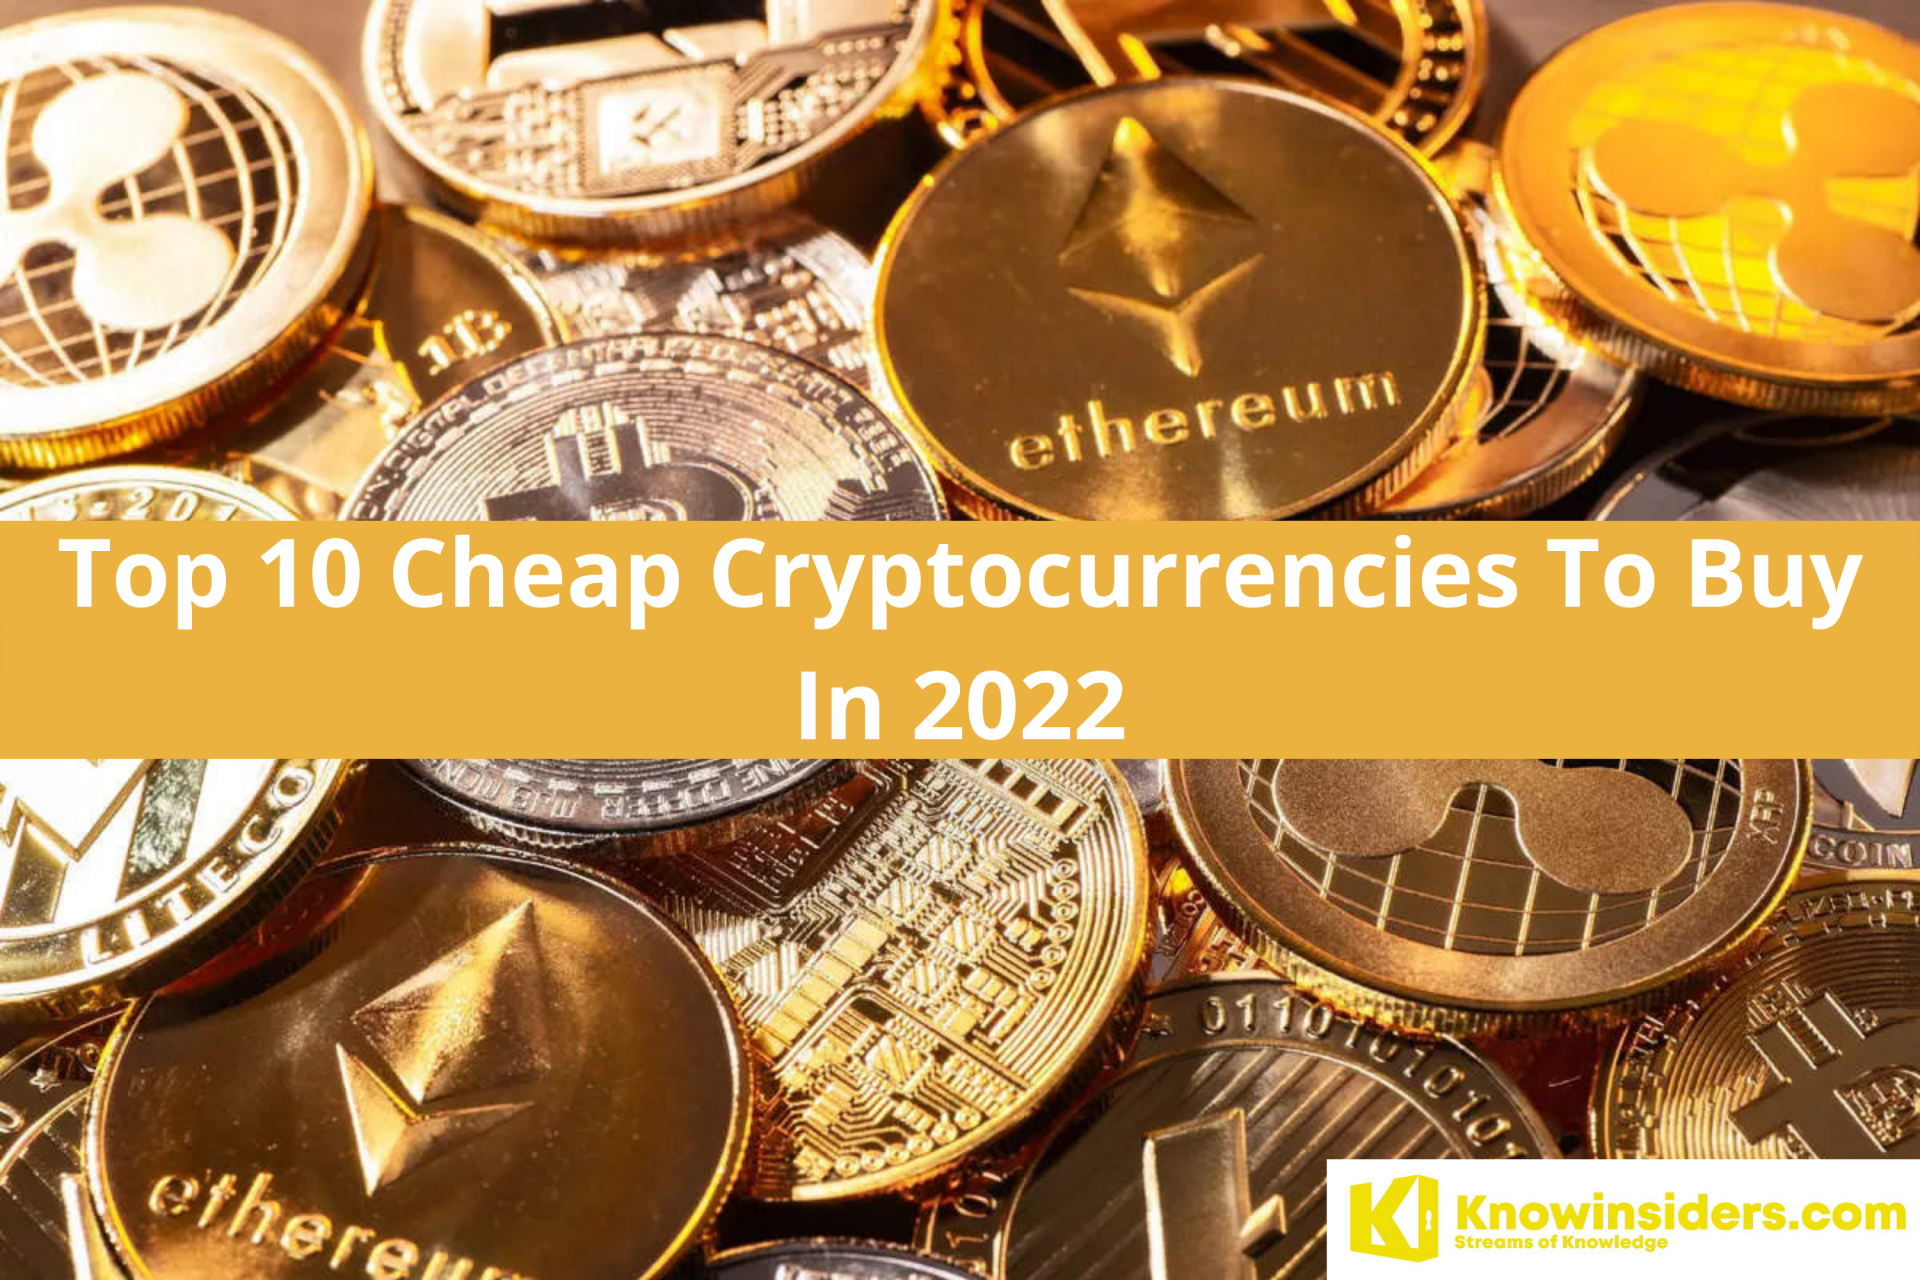 Top 10 Cheap Cryptocurrencies To Buy In 2022